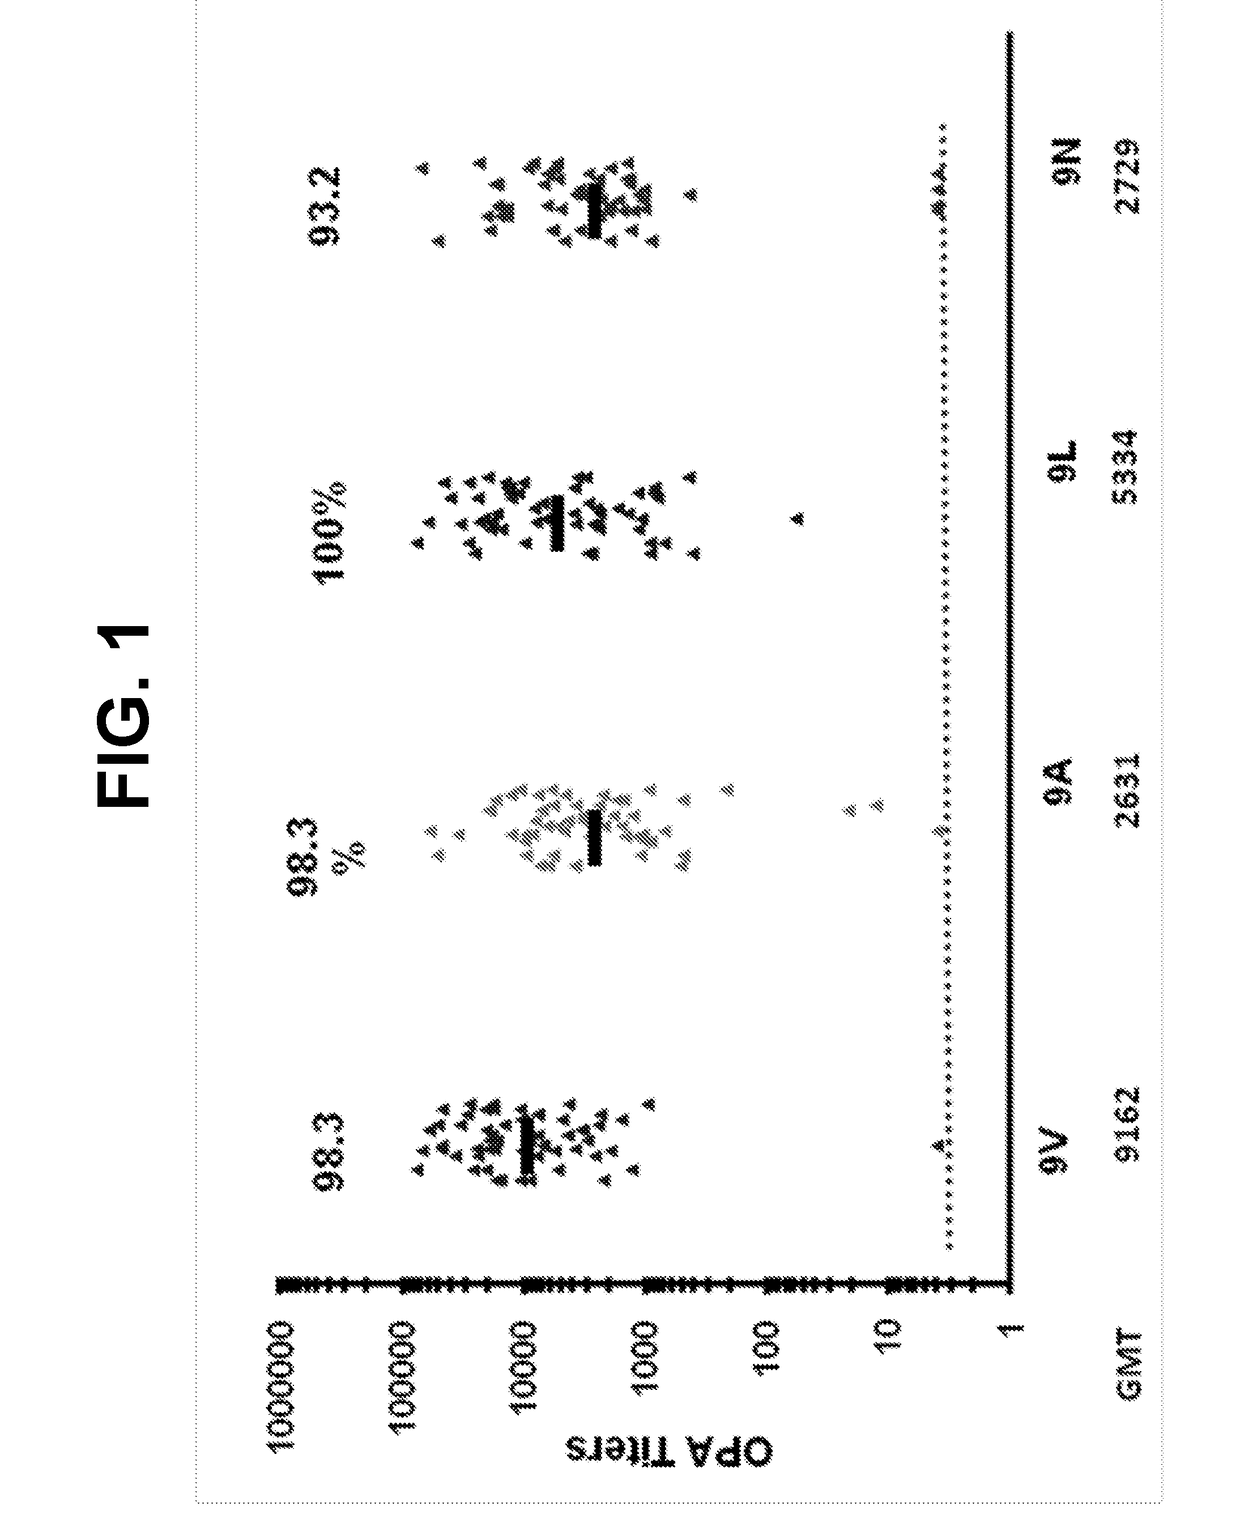 Immunogenic Compositions for Use in Pneumococcal Vaccines